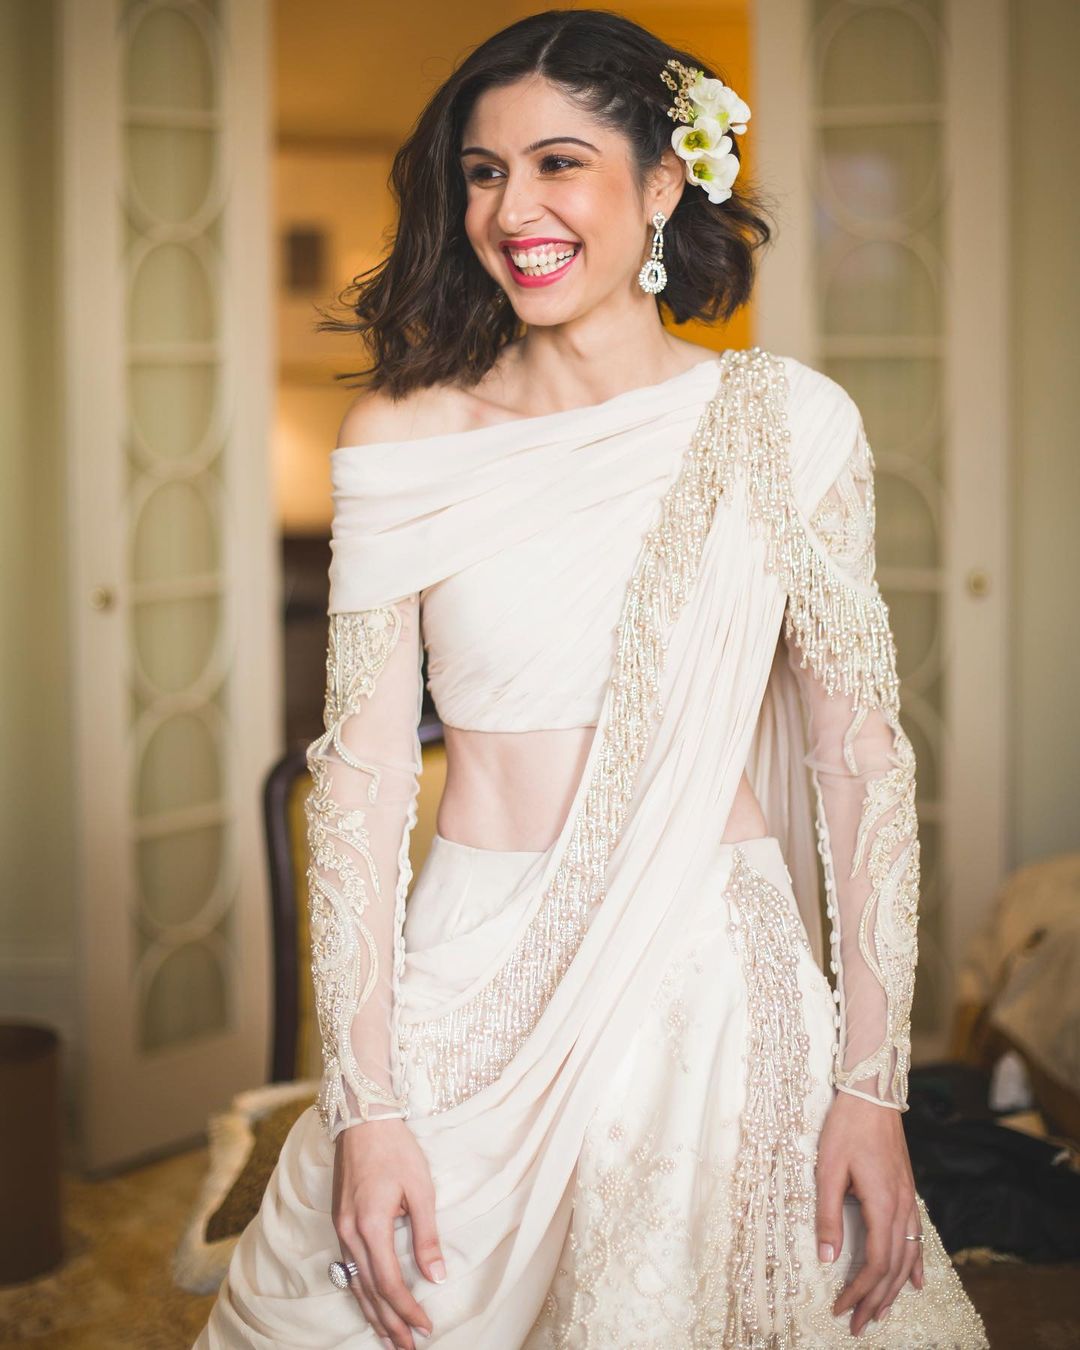 10 Brides Who Absolutely Rocked Short Hair On The Wedding Day | Fashion |  WeddingSutra